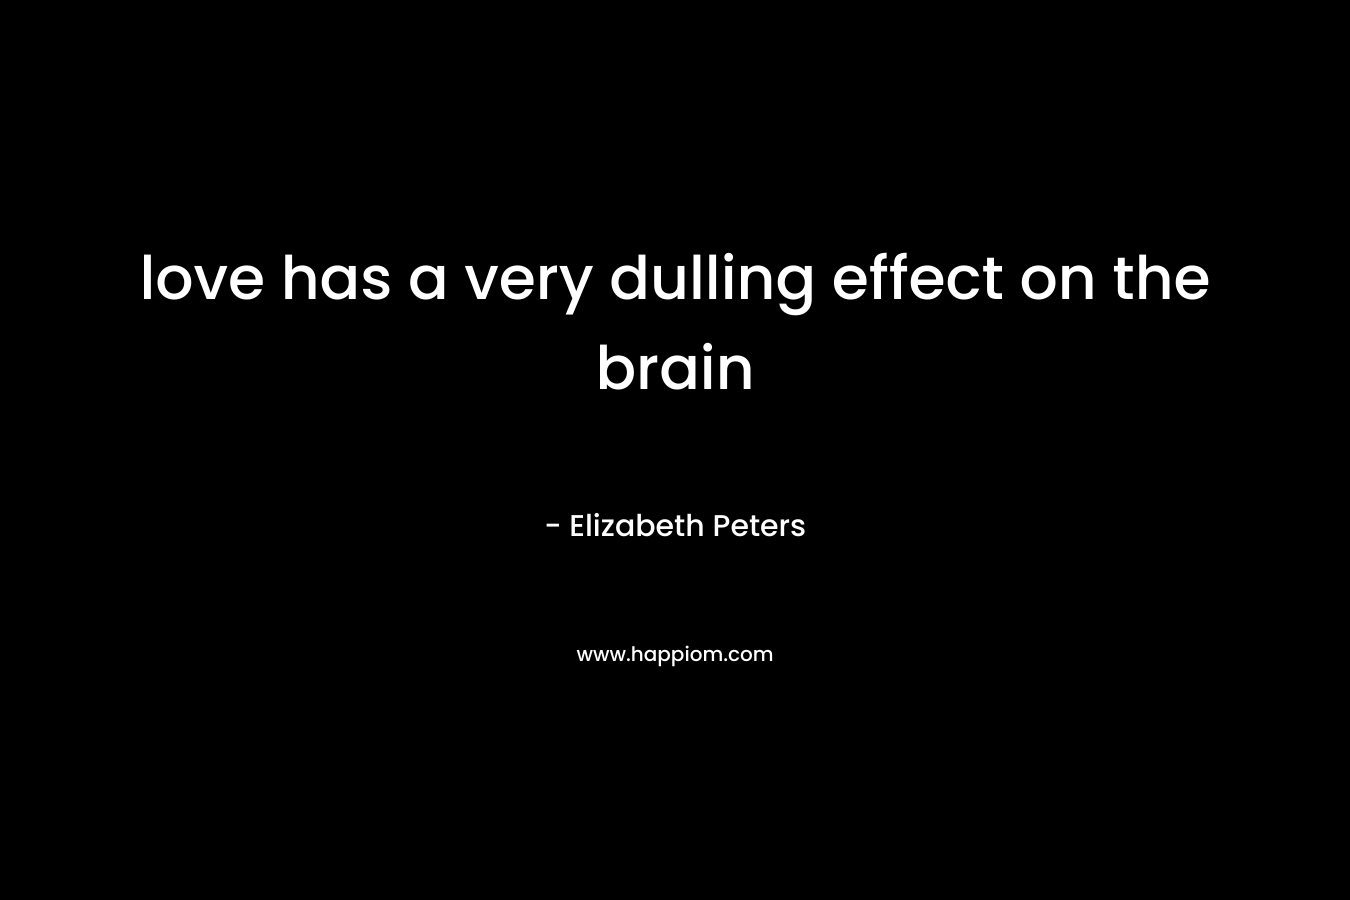 love has a very dulling effect on the brain